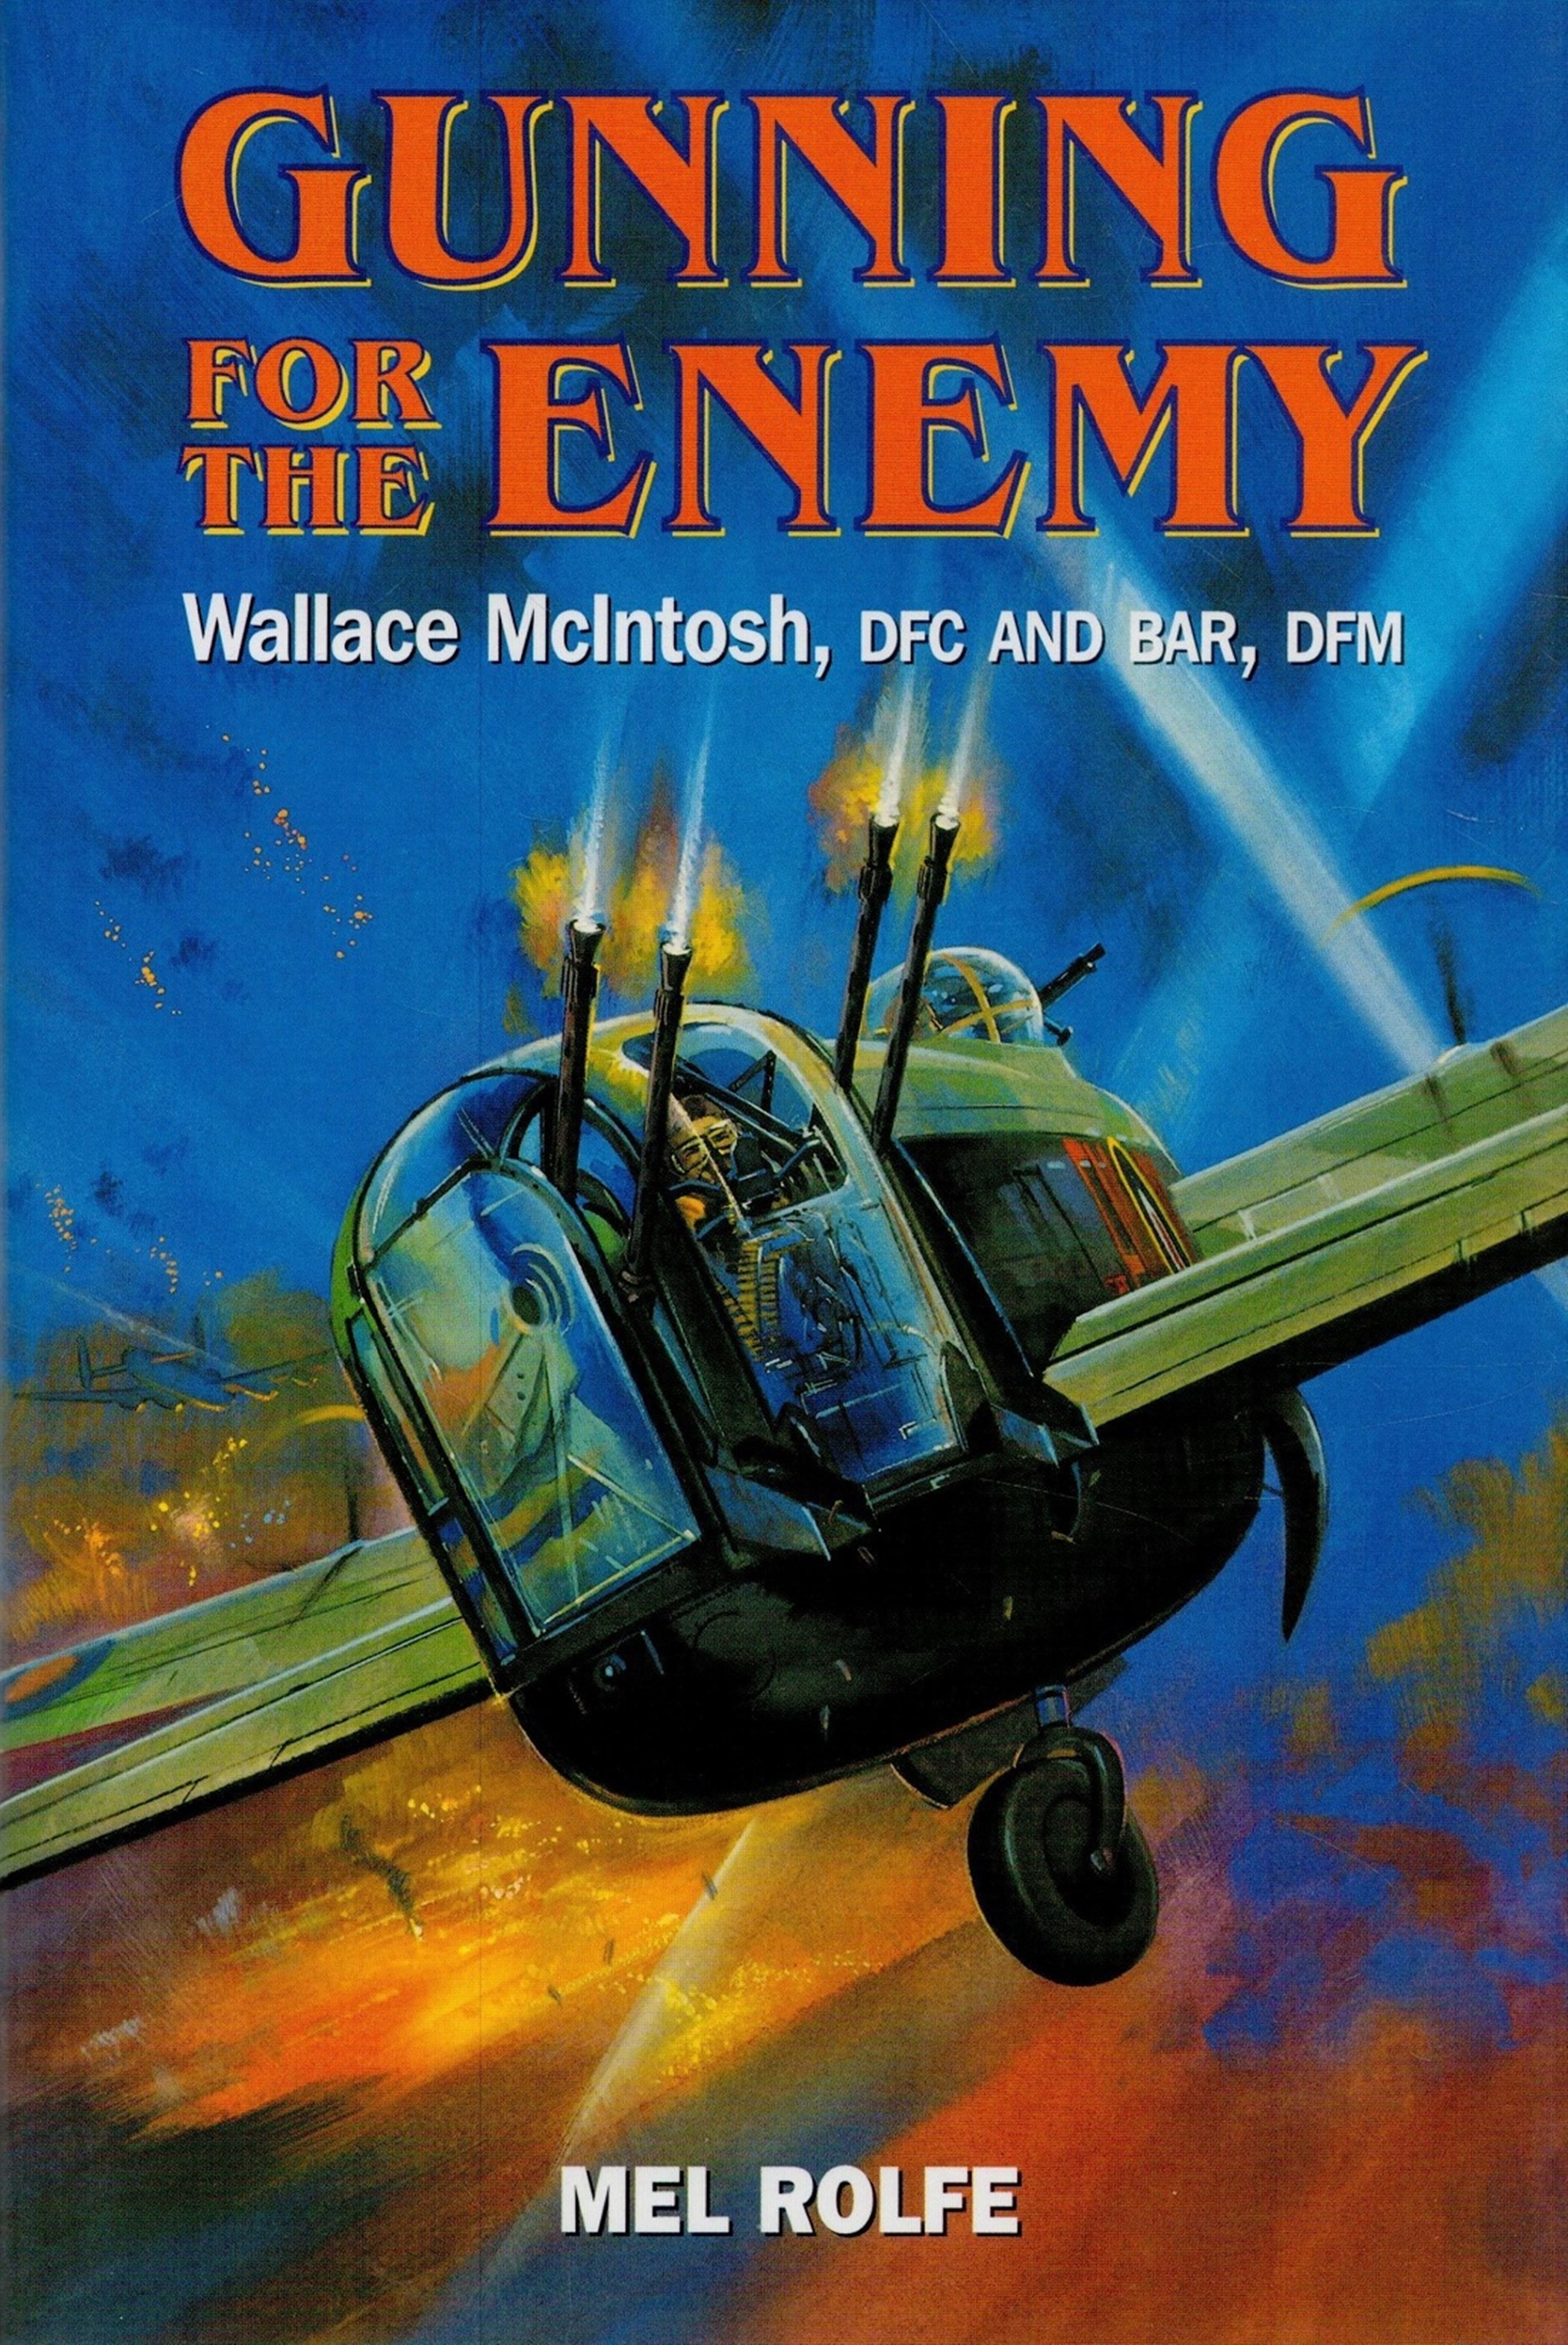 Multi-Signed Book - Gunning for The Enemy Wallace McIntosh, DFC and Bar, DFM by Mel Rolfe 2003 - Bild 2 aus 9